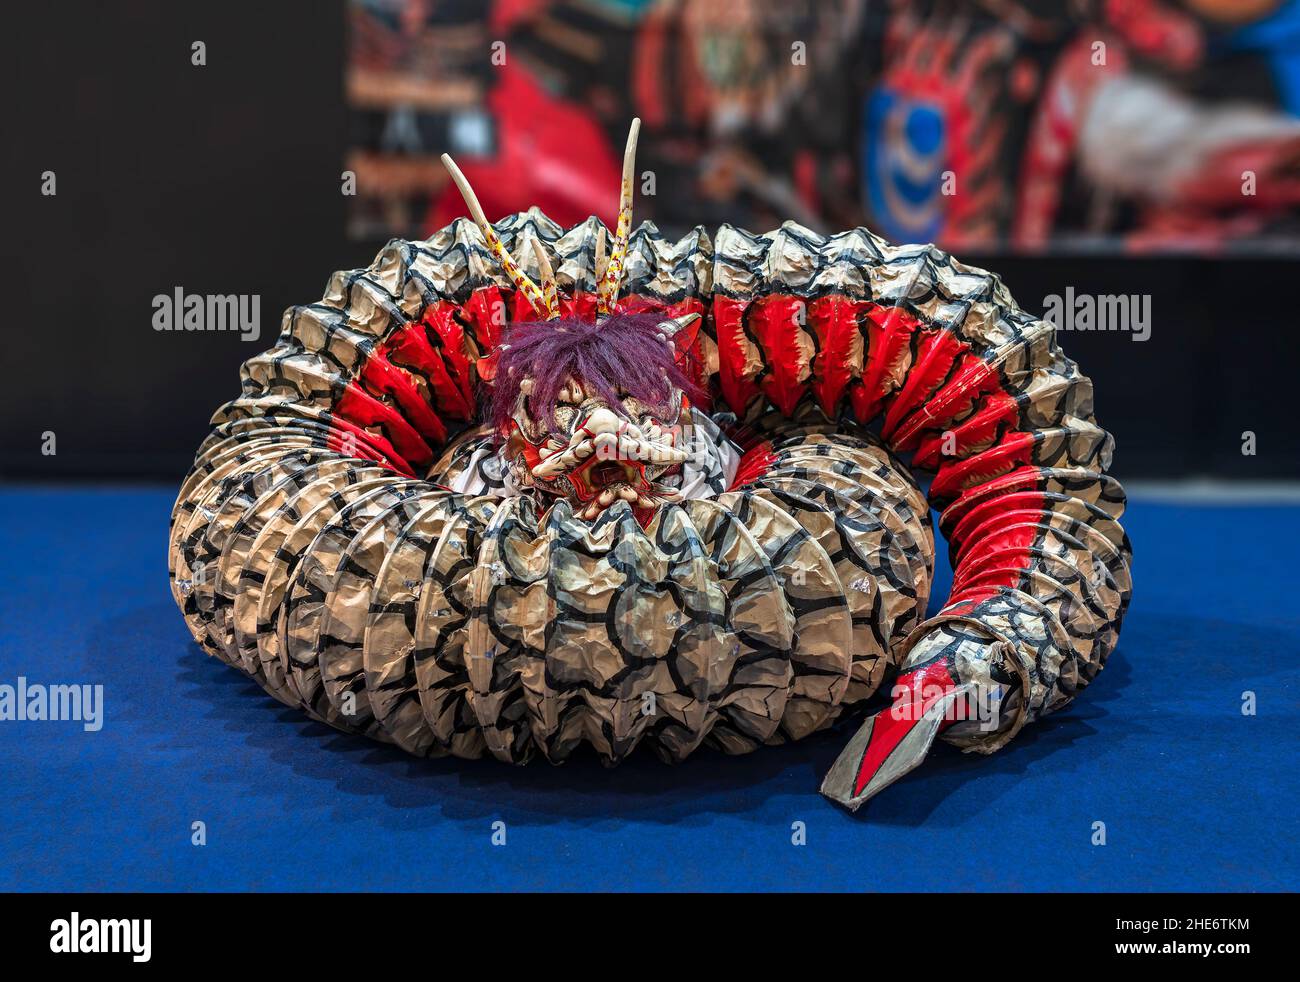 tokyo, japan - august 24 2021: Giant Orochi serpent puppet made in accordion paper used for the Shinto theatrical dance Iwami Kagura depicting the sto Stock Photo